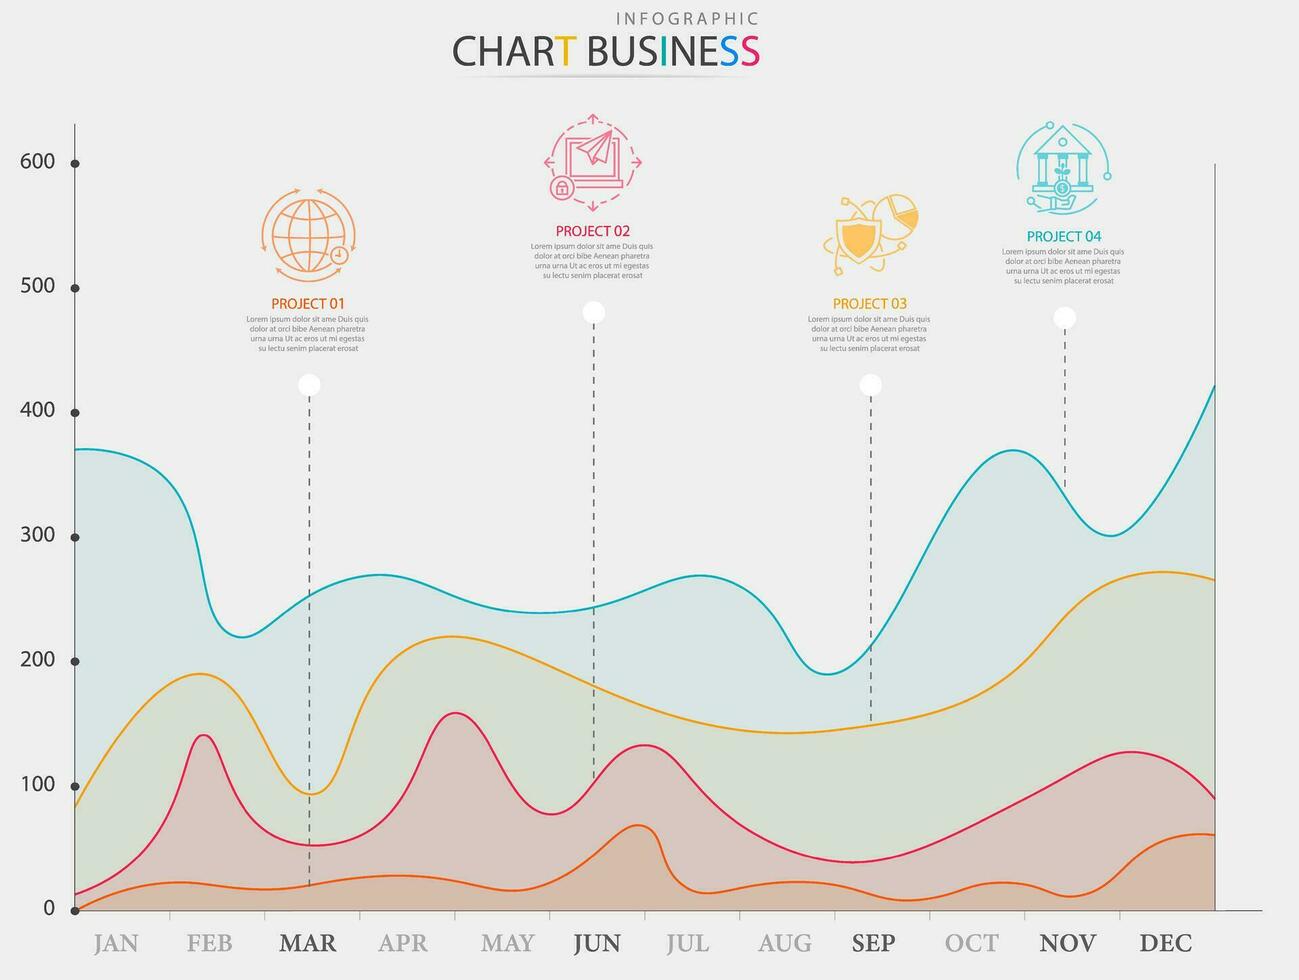 Modern infographic style with interface.12-month financial statistics chart. vector